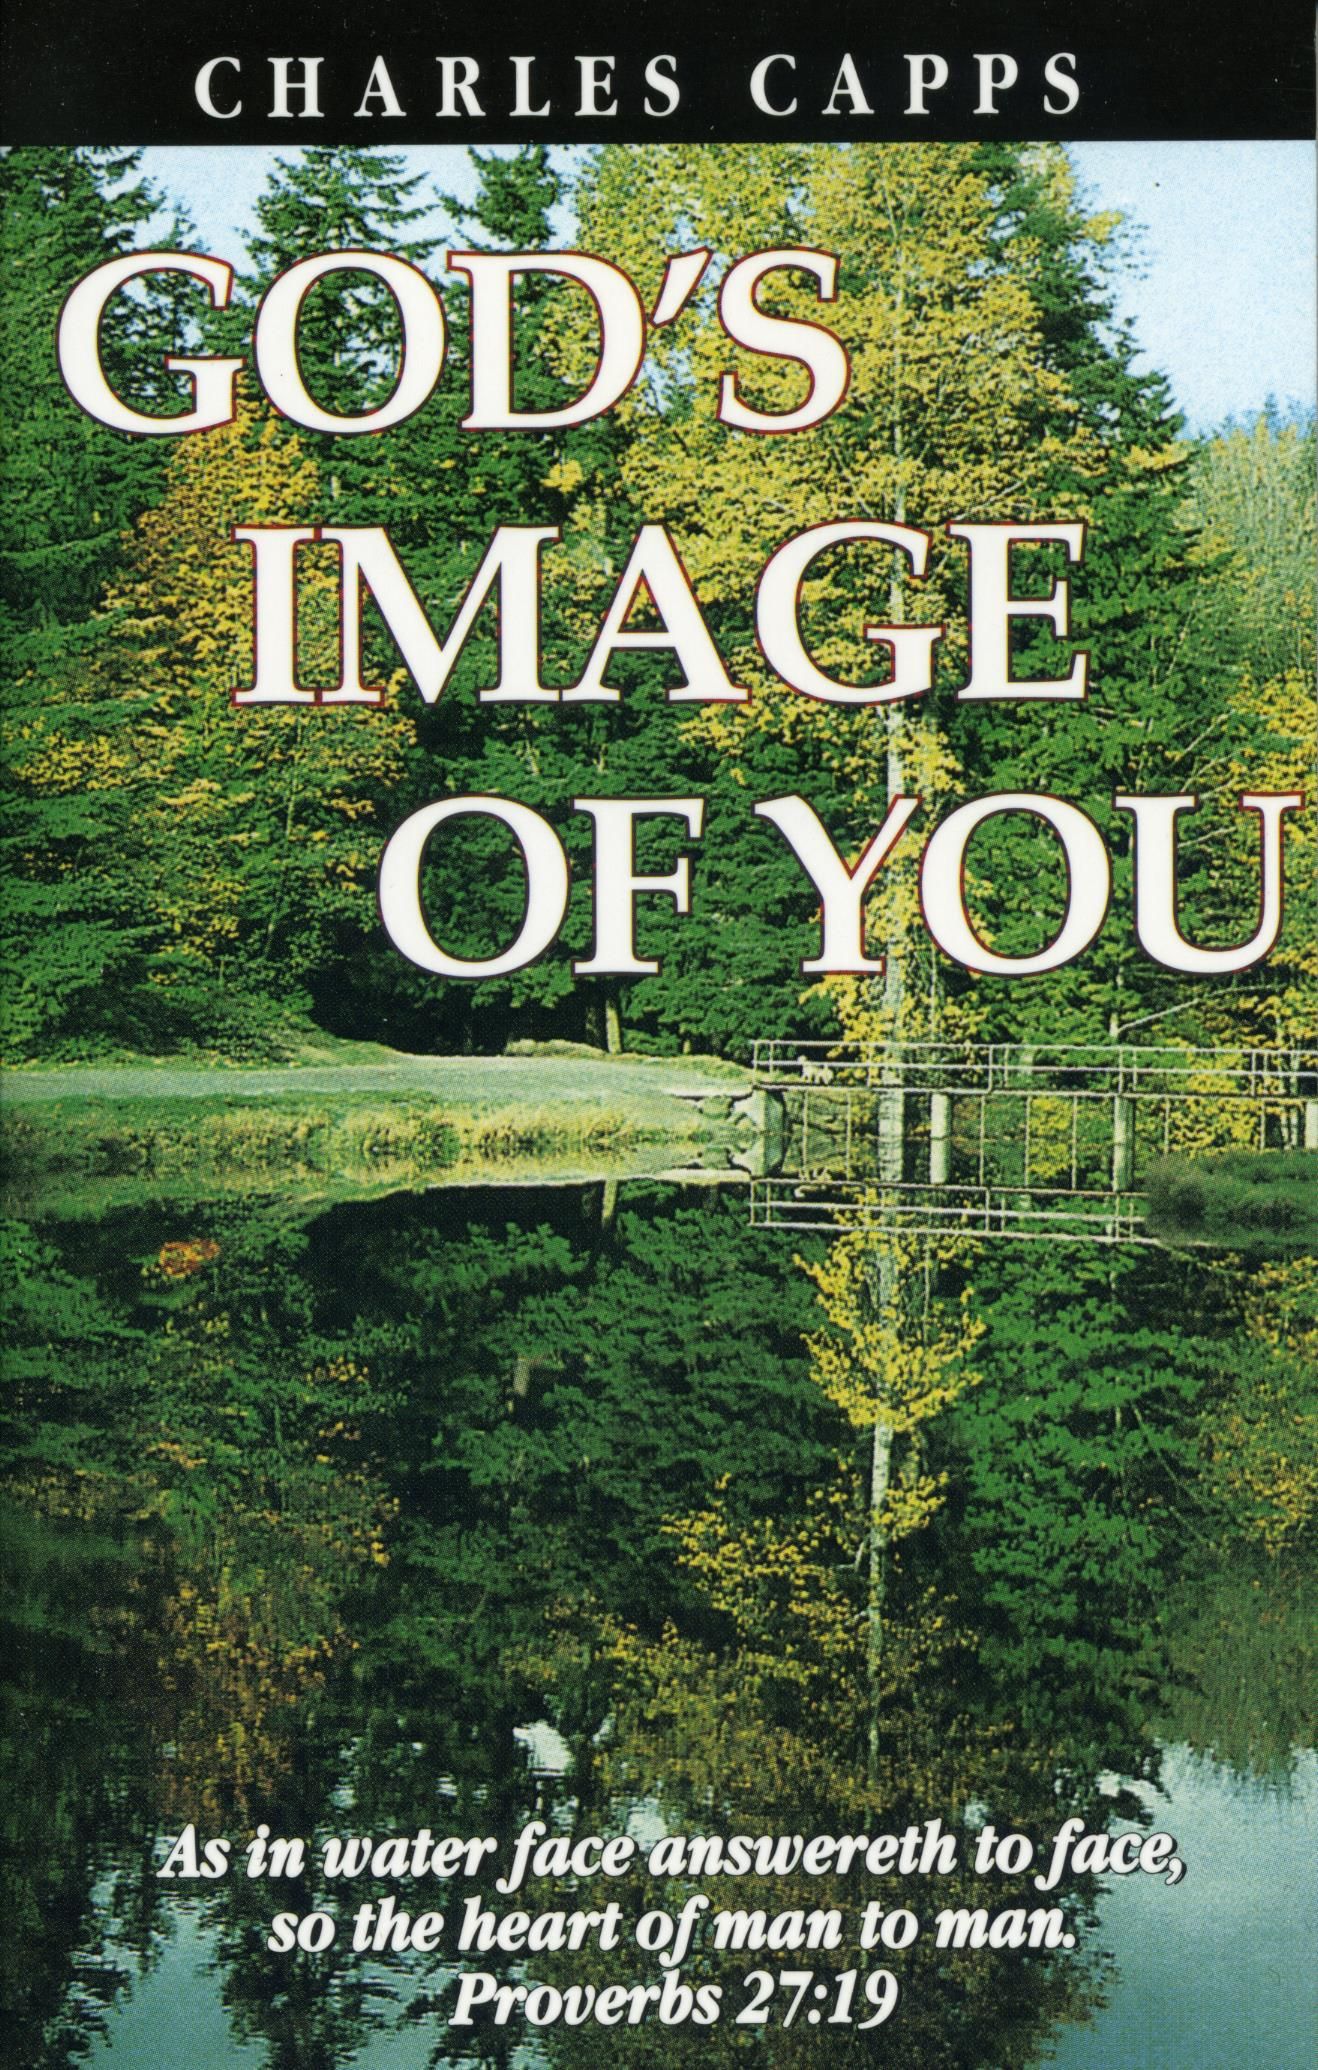 Charles Capps: God's Image of you